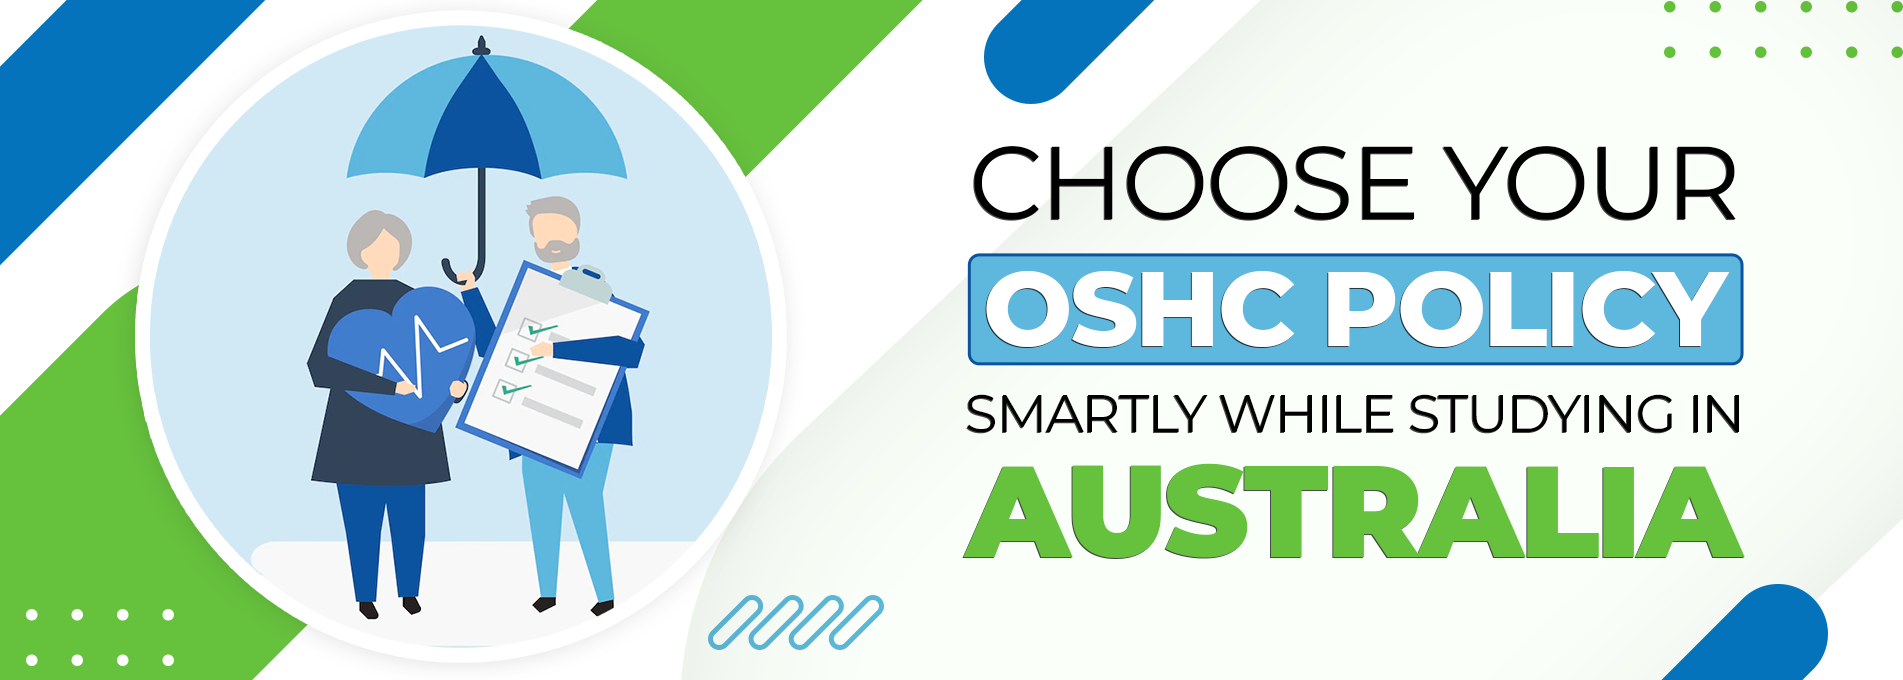 Choose Your OSHC Policy Smartly While Studying in Australia